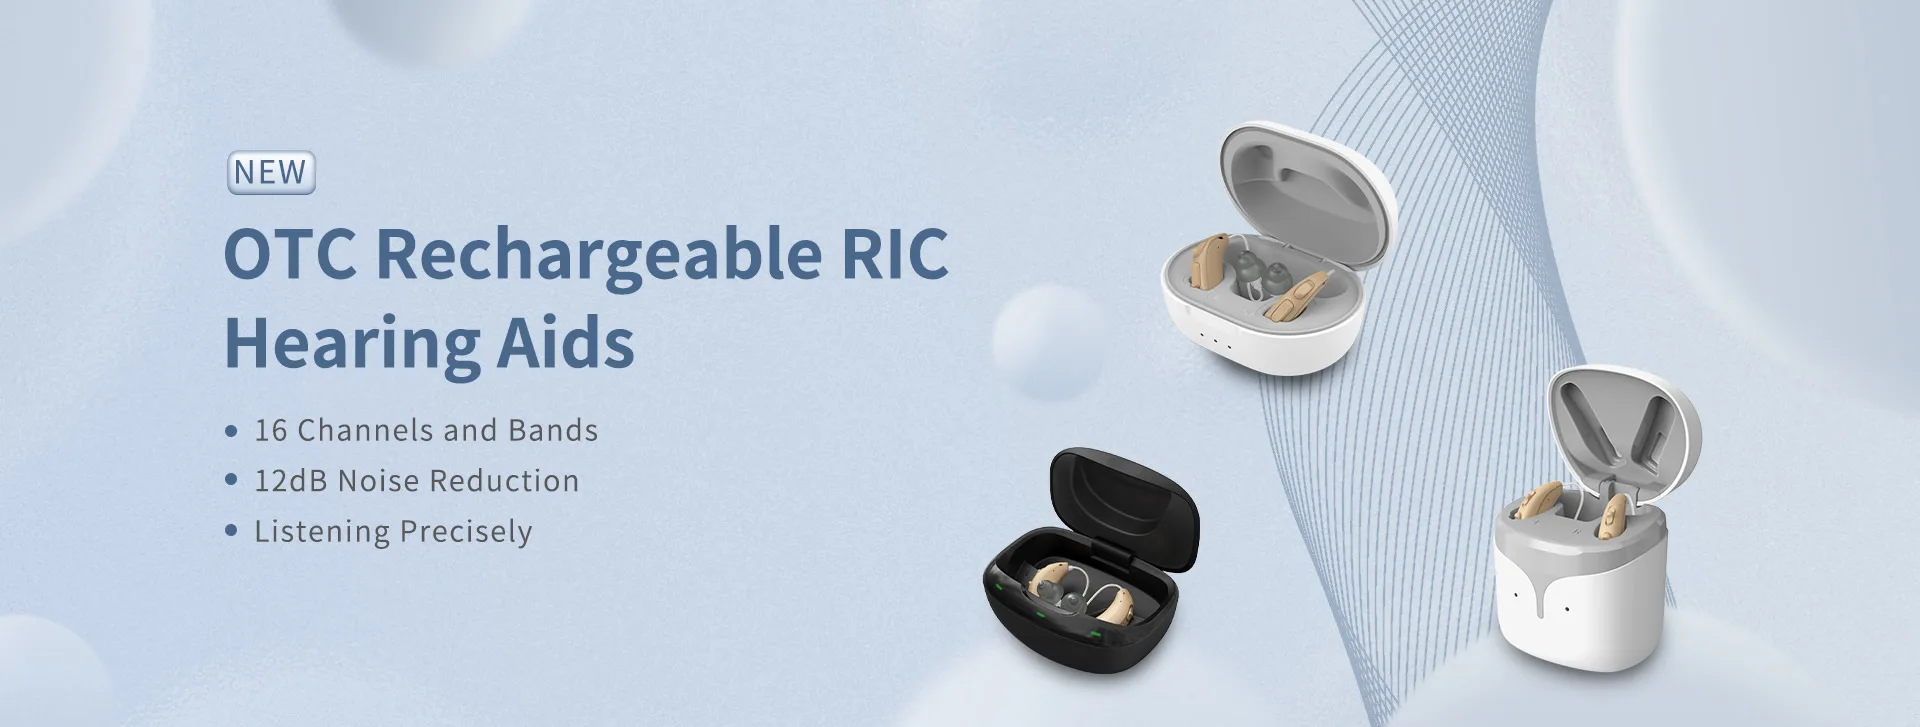 OTC Rechargeable RIC Hearing Aids